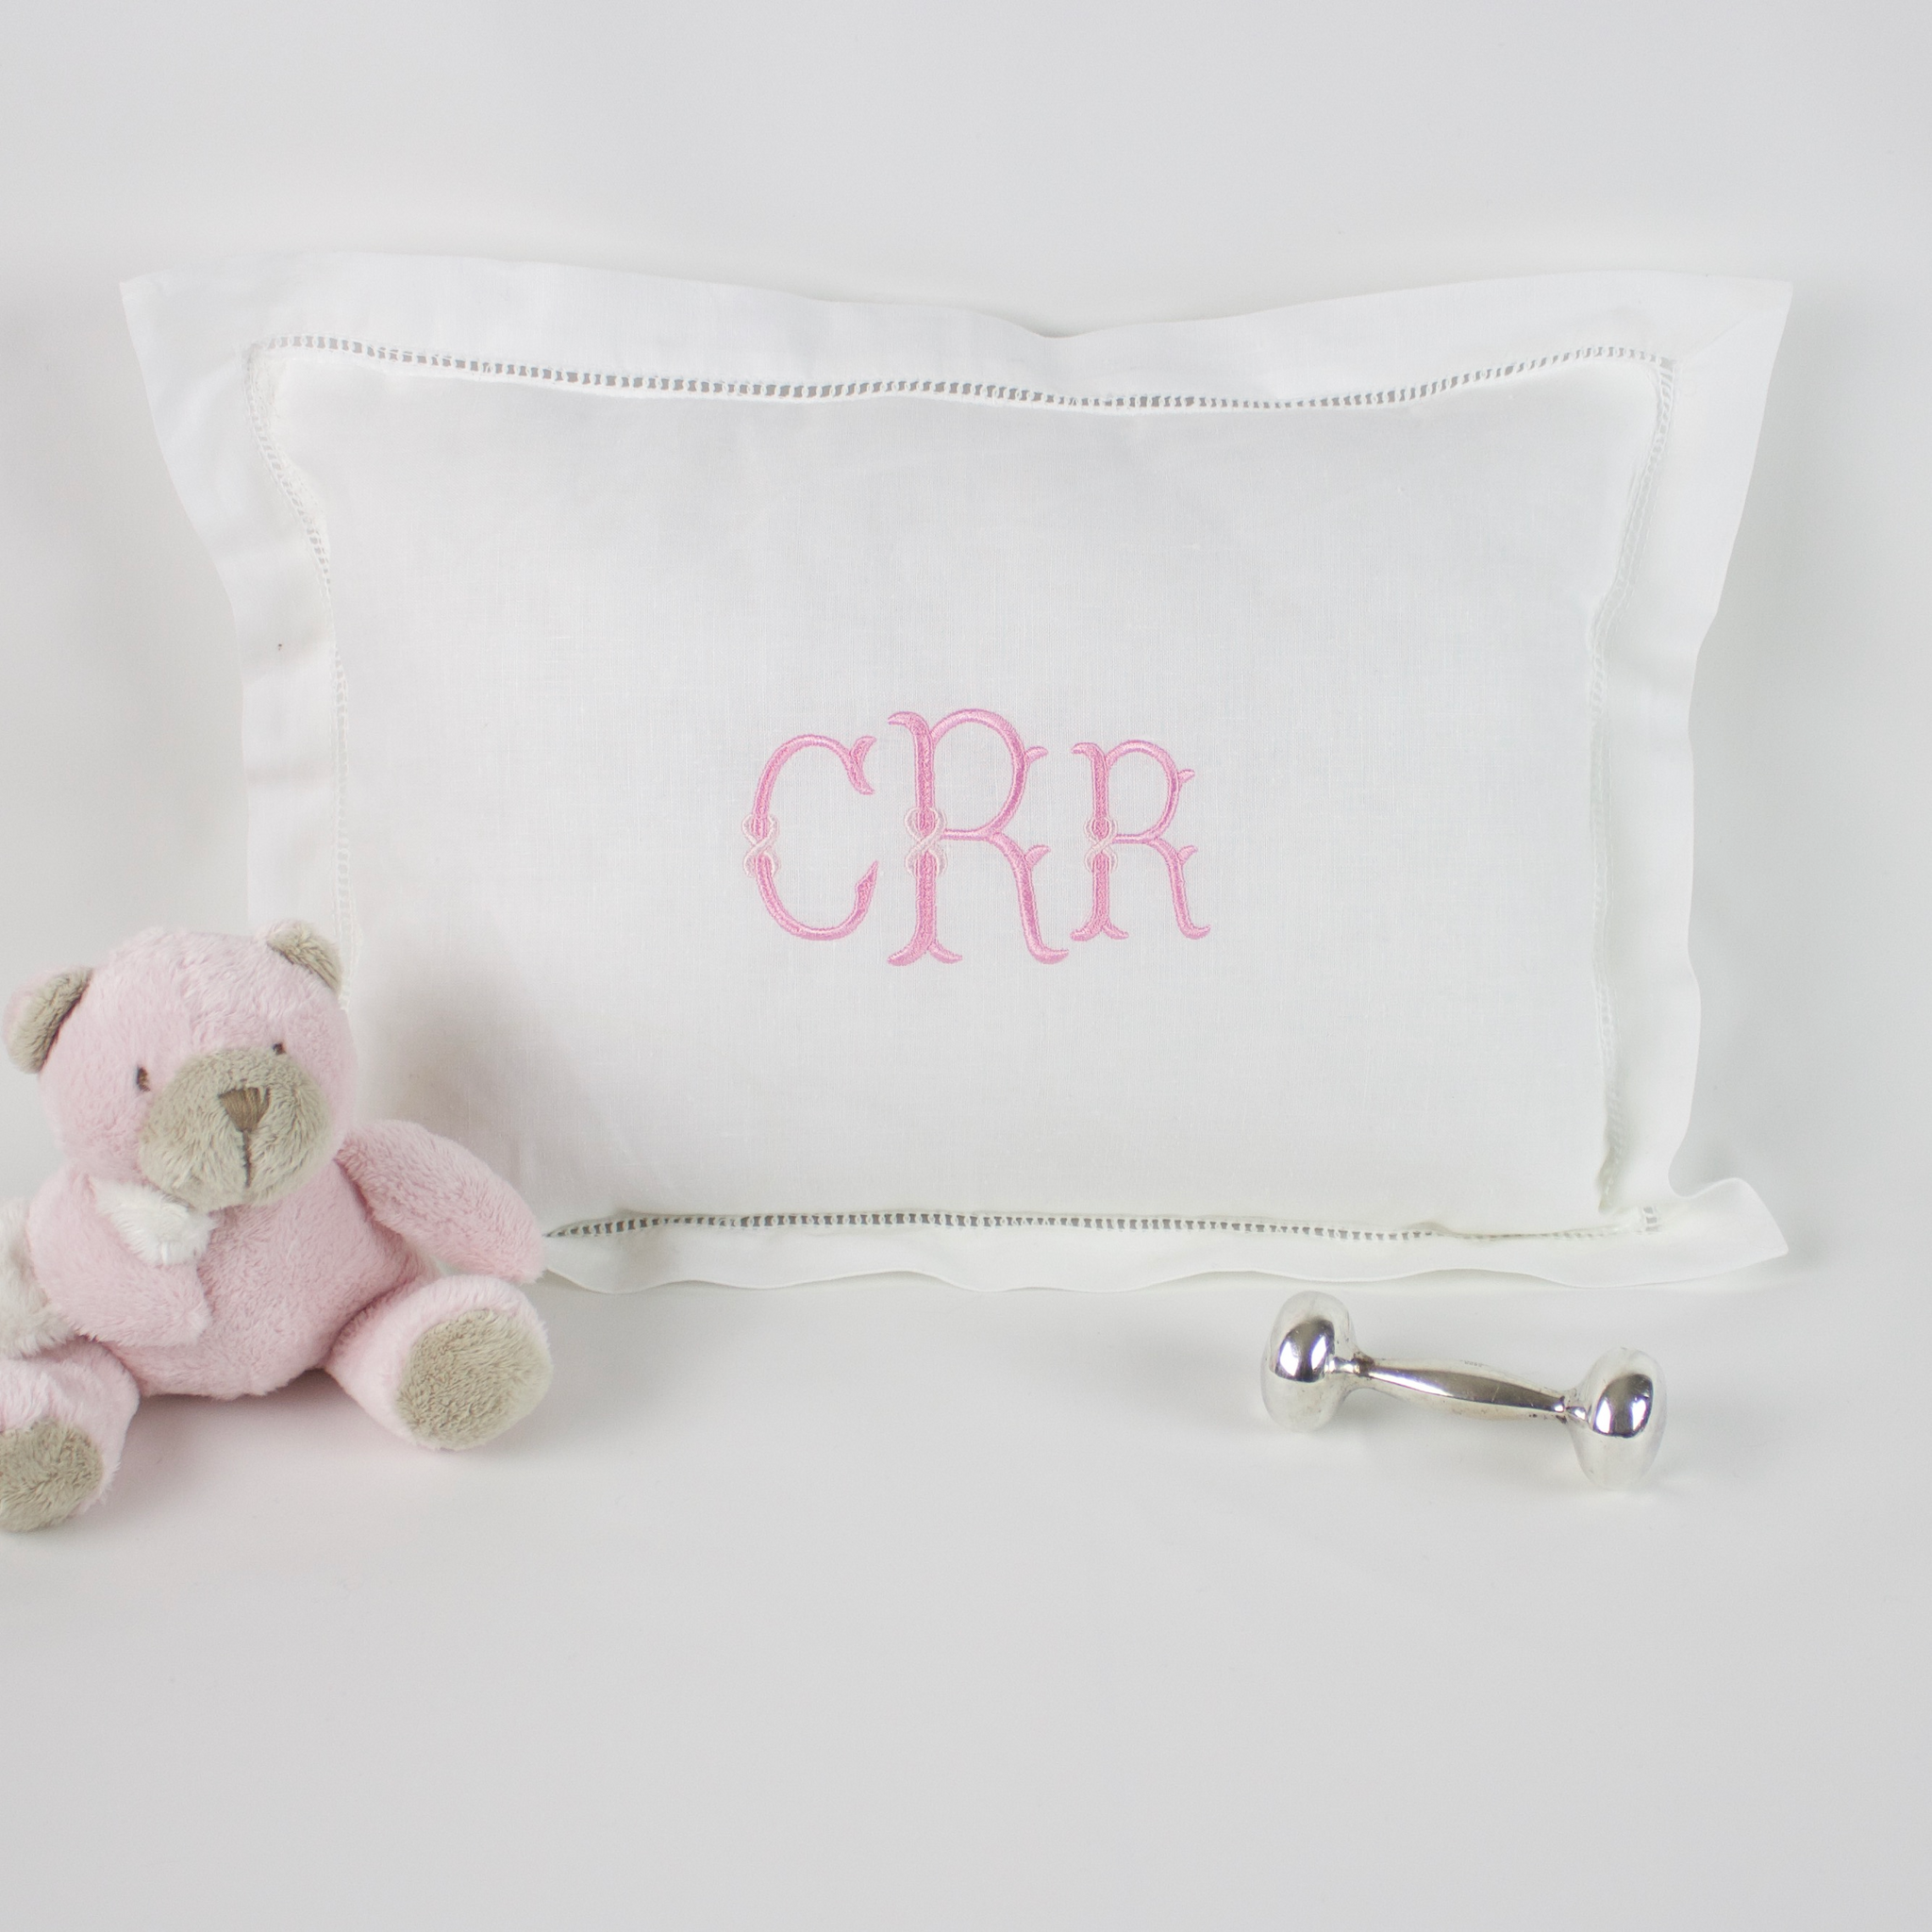 Personalized Linen Baby Pillow - My Embroidered Gifts